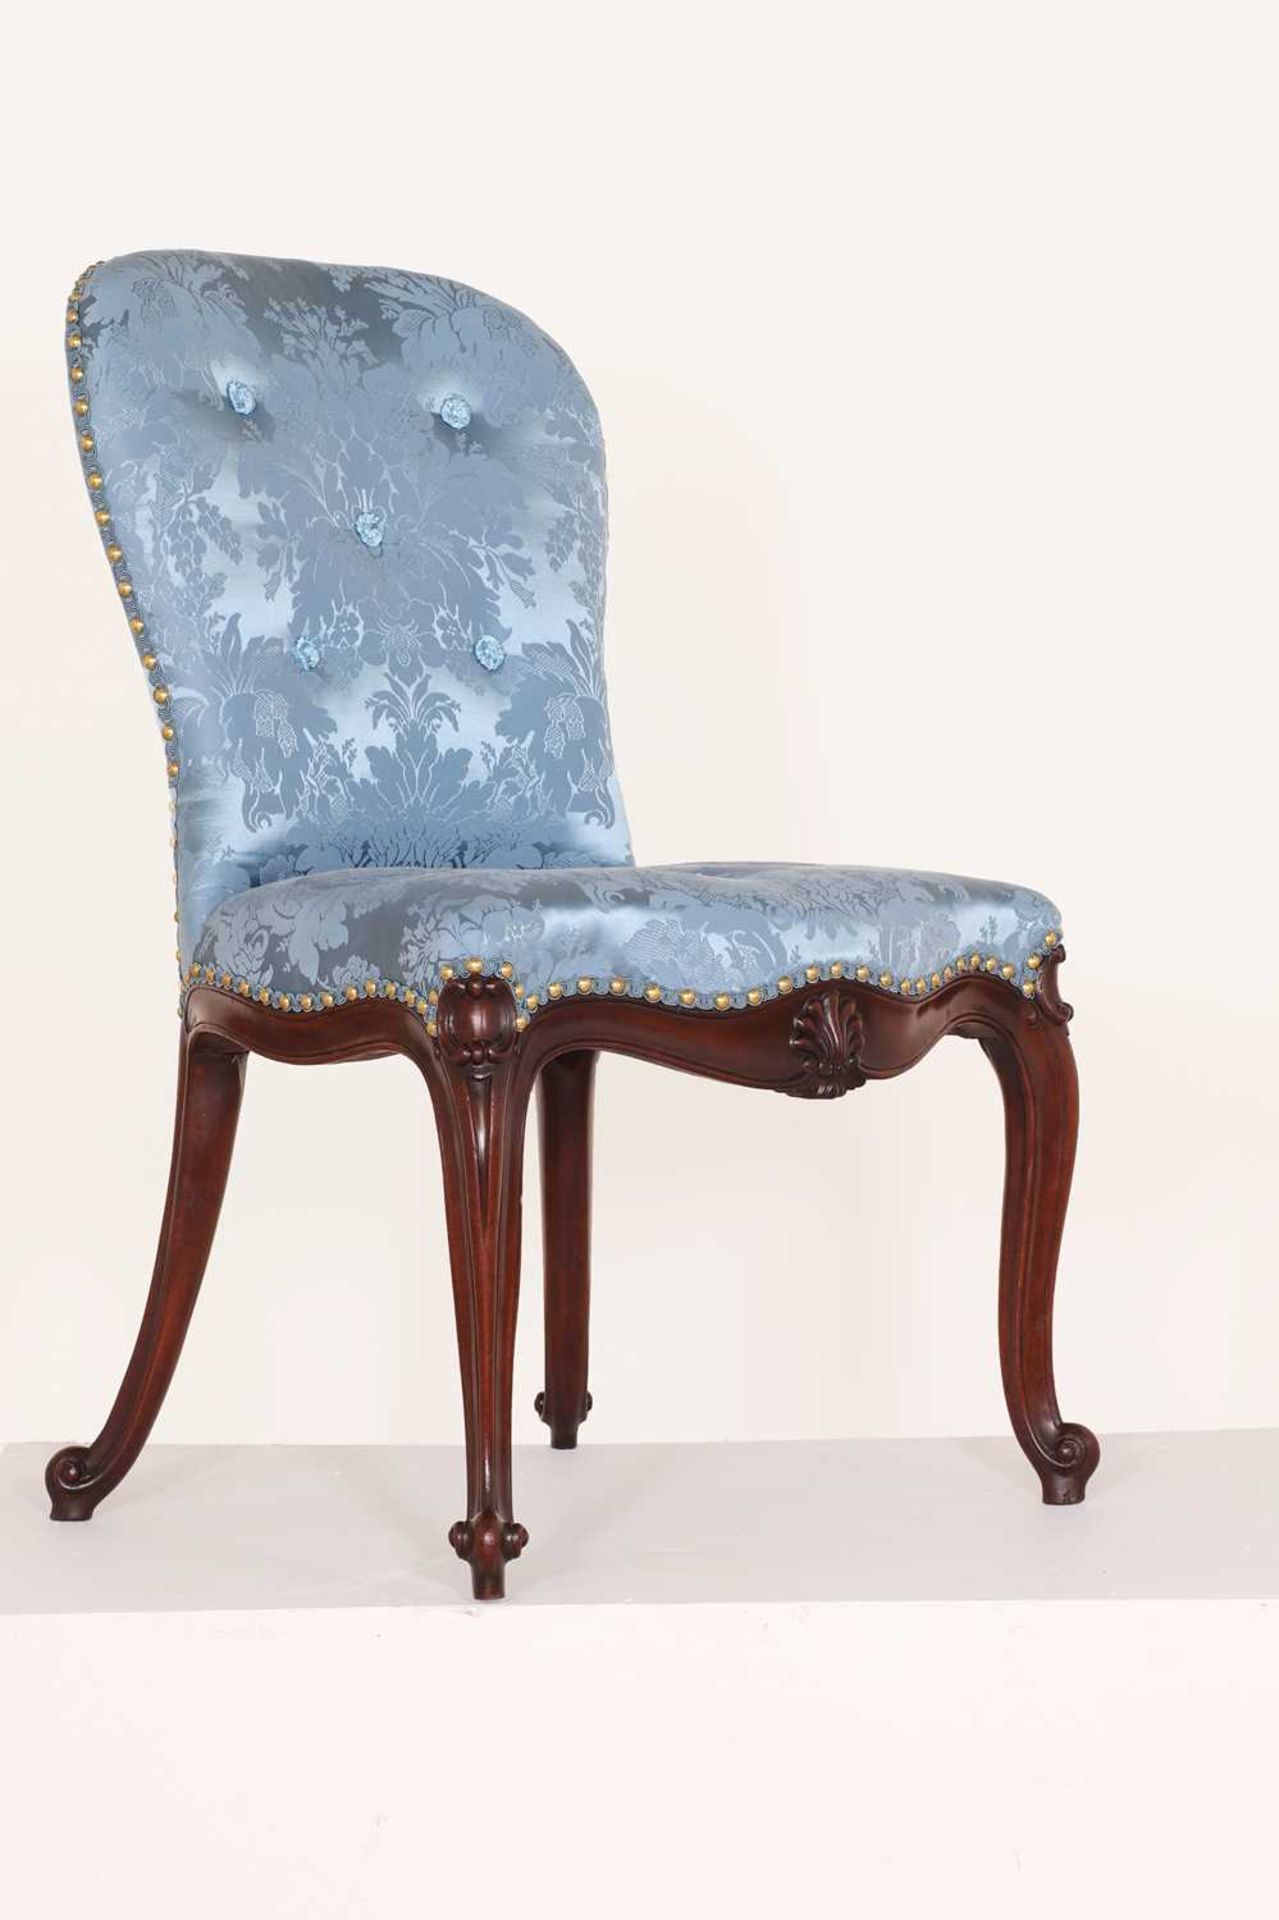 A George III mahogany side chair attributed to Thomas Chippendale - Image 2 of 53